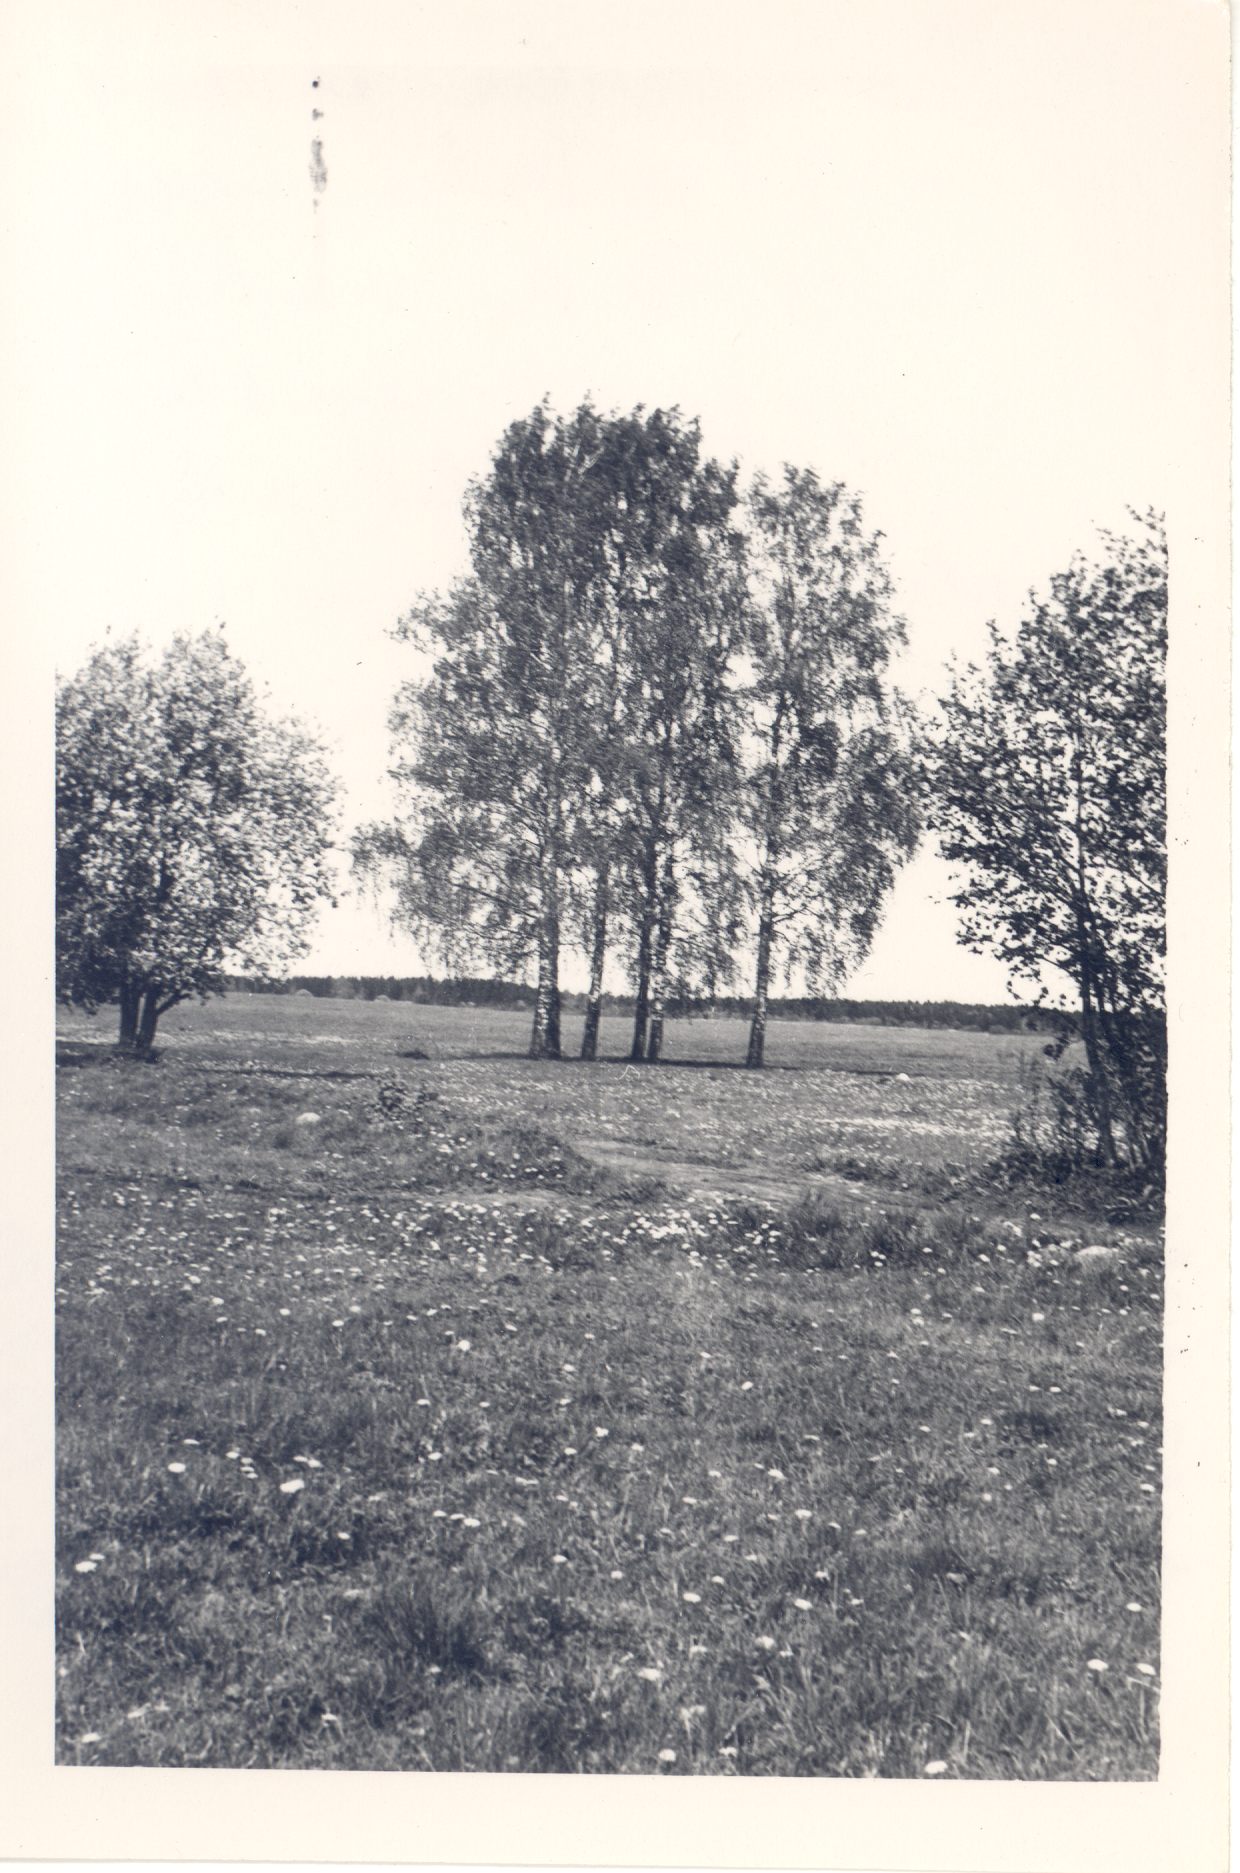 [Born Height,Ed. (Brunberg, Ed.] Prunni farm itself. Location Paide raj. Valasti village. The farm was located between two cassettes, which Jaan Brunberg planted.